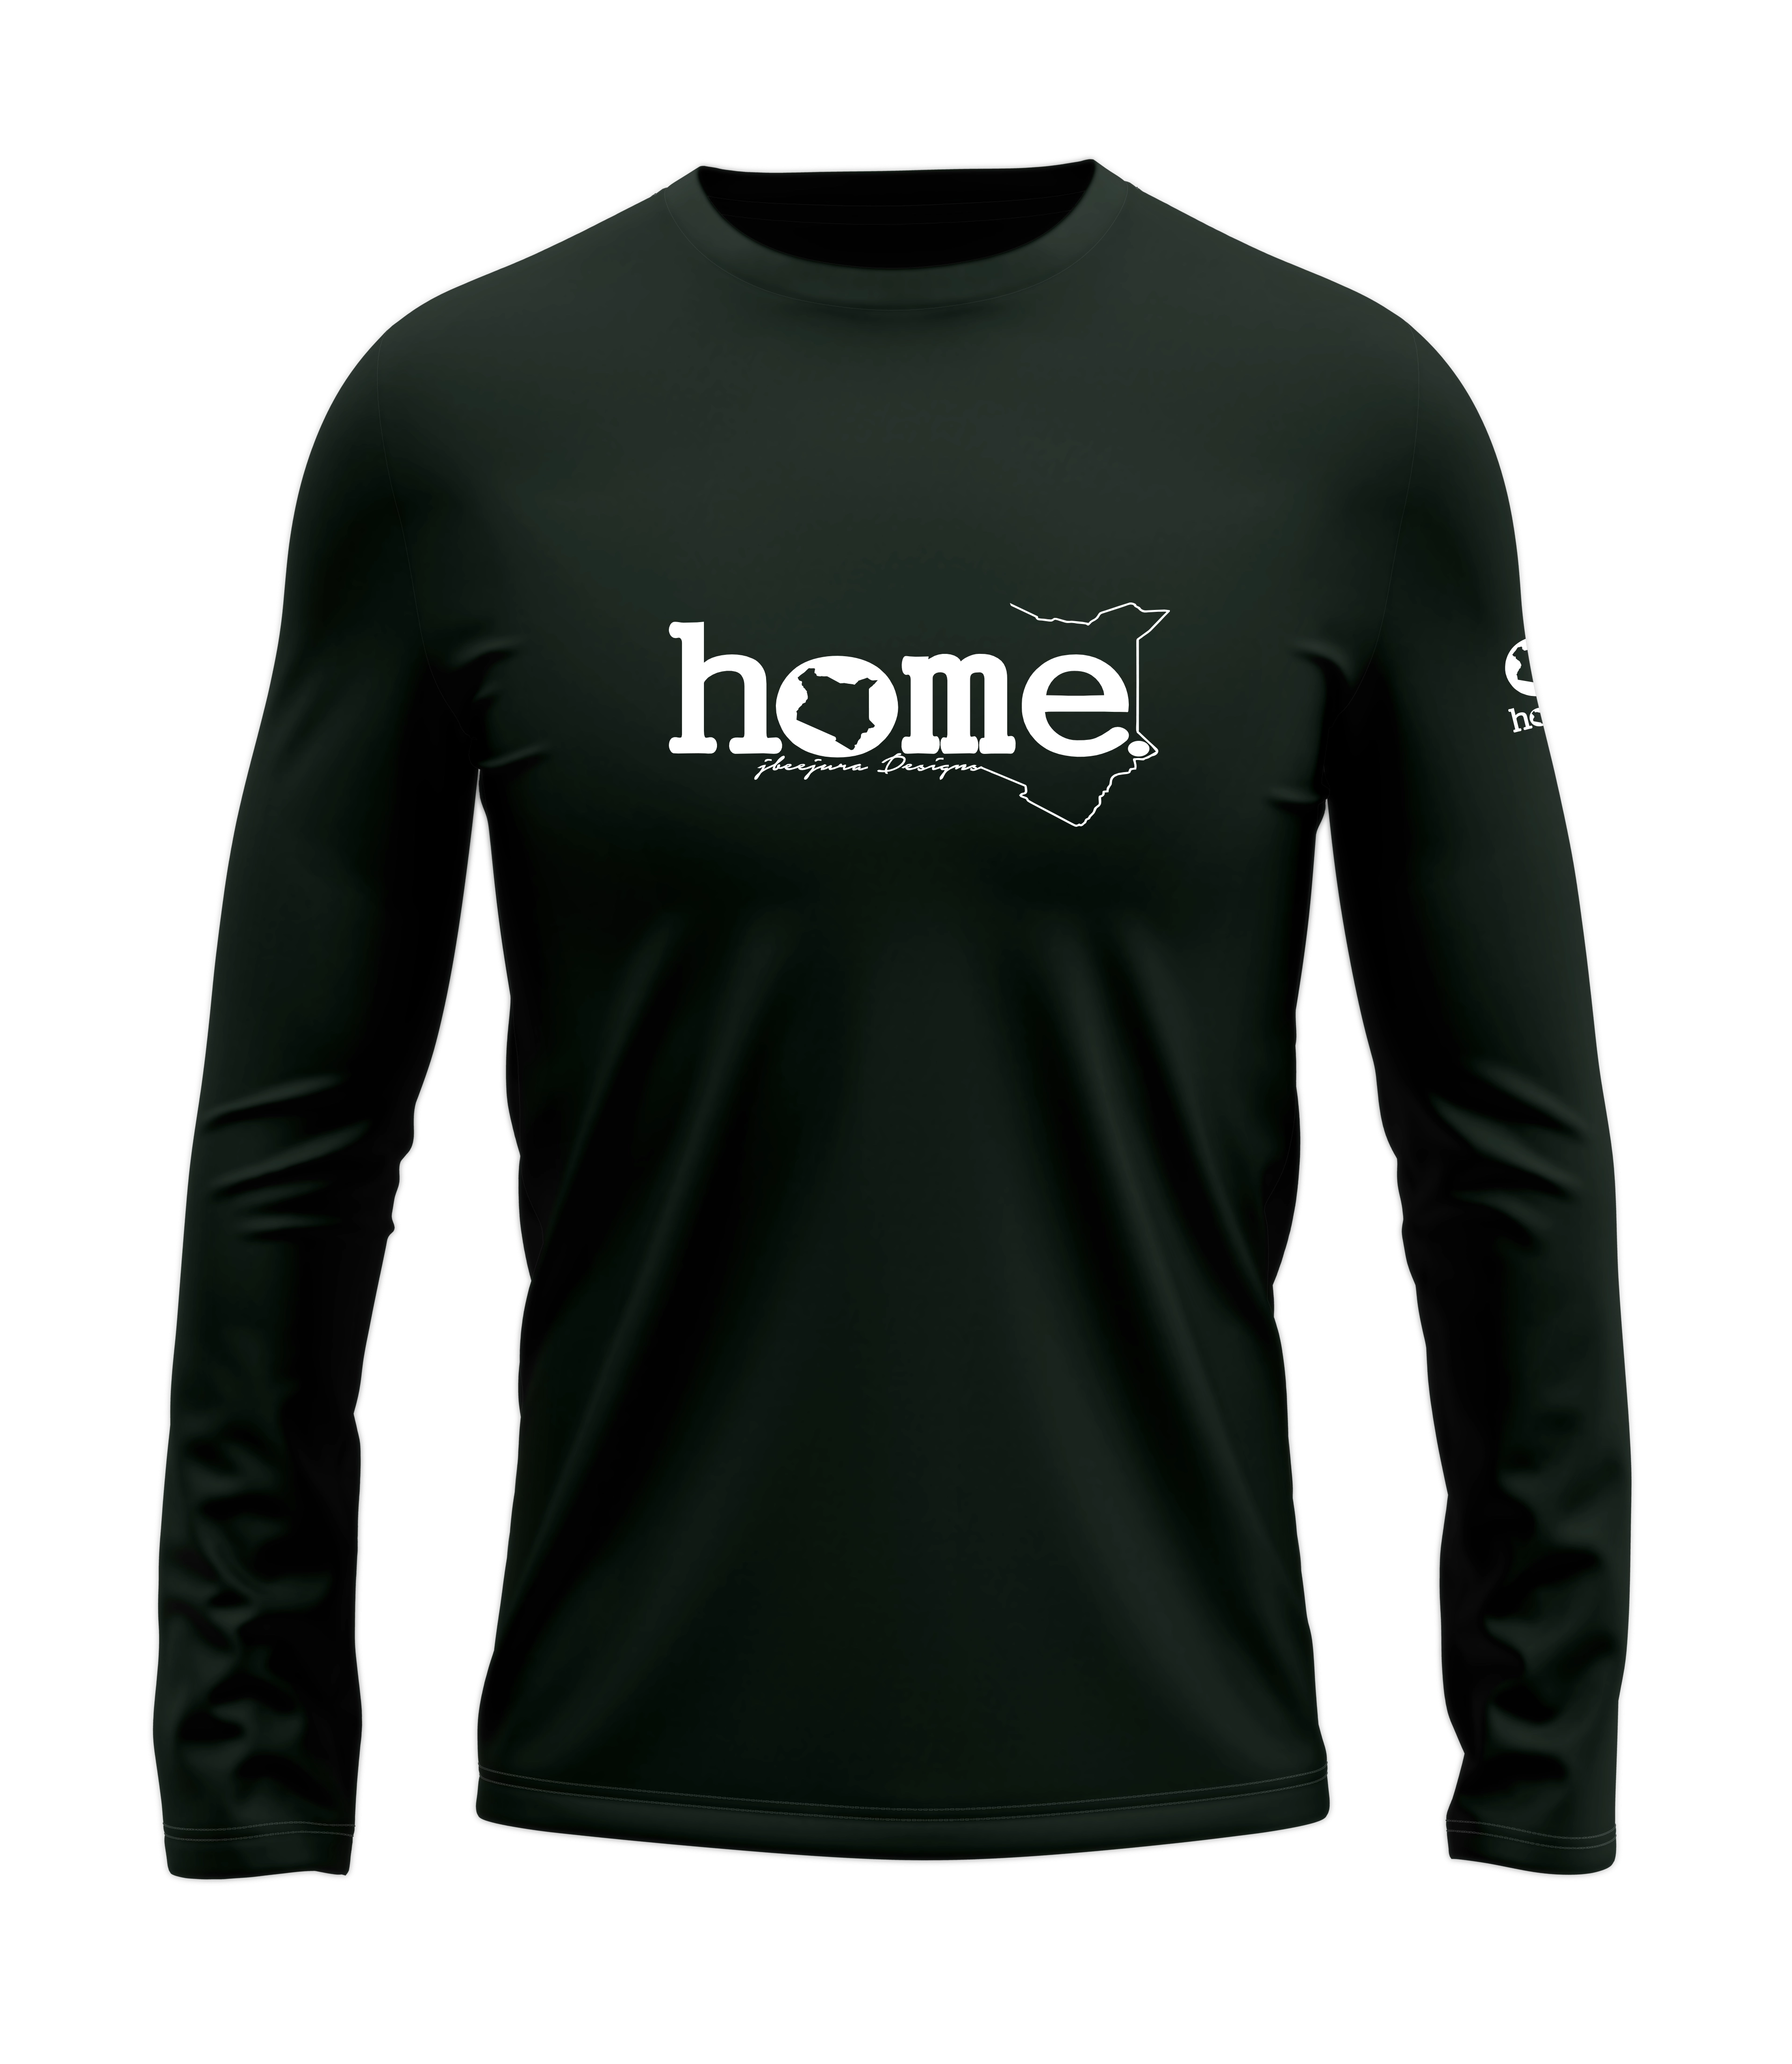 home_254 LONG-SLEEVED FOREST GREEN T-SHIRT WITH A WHITE CLASSIC WORDS PRINT – COTTON PLUS FABRIC